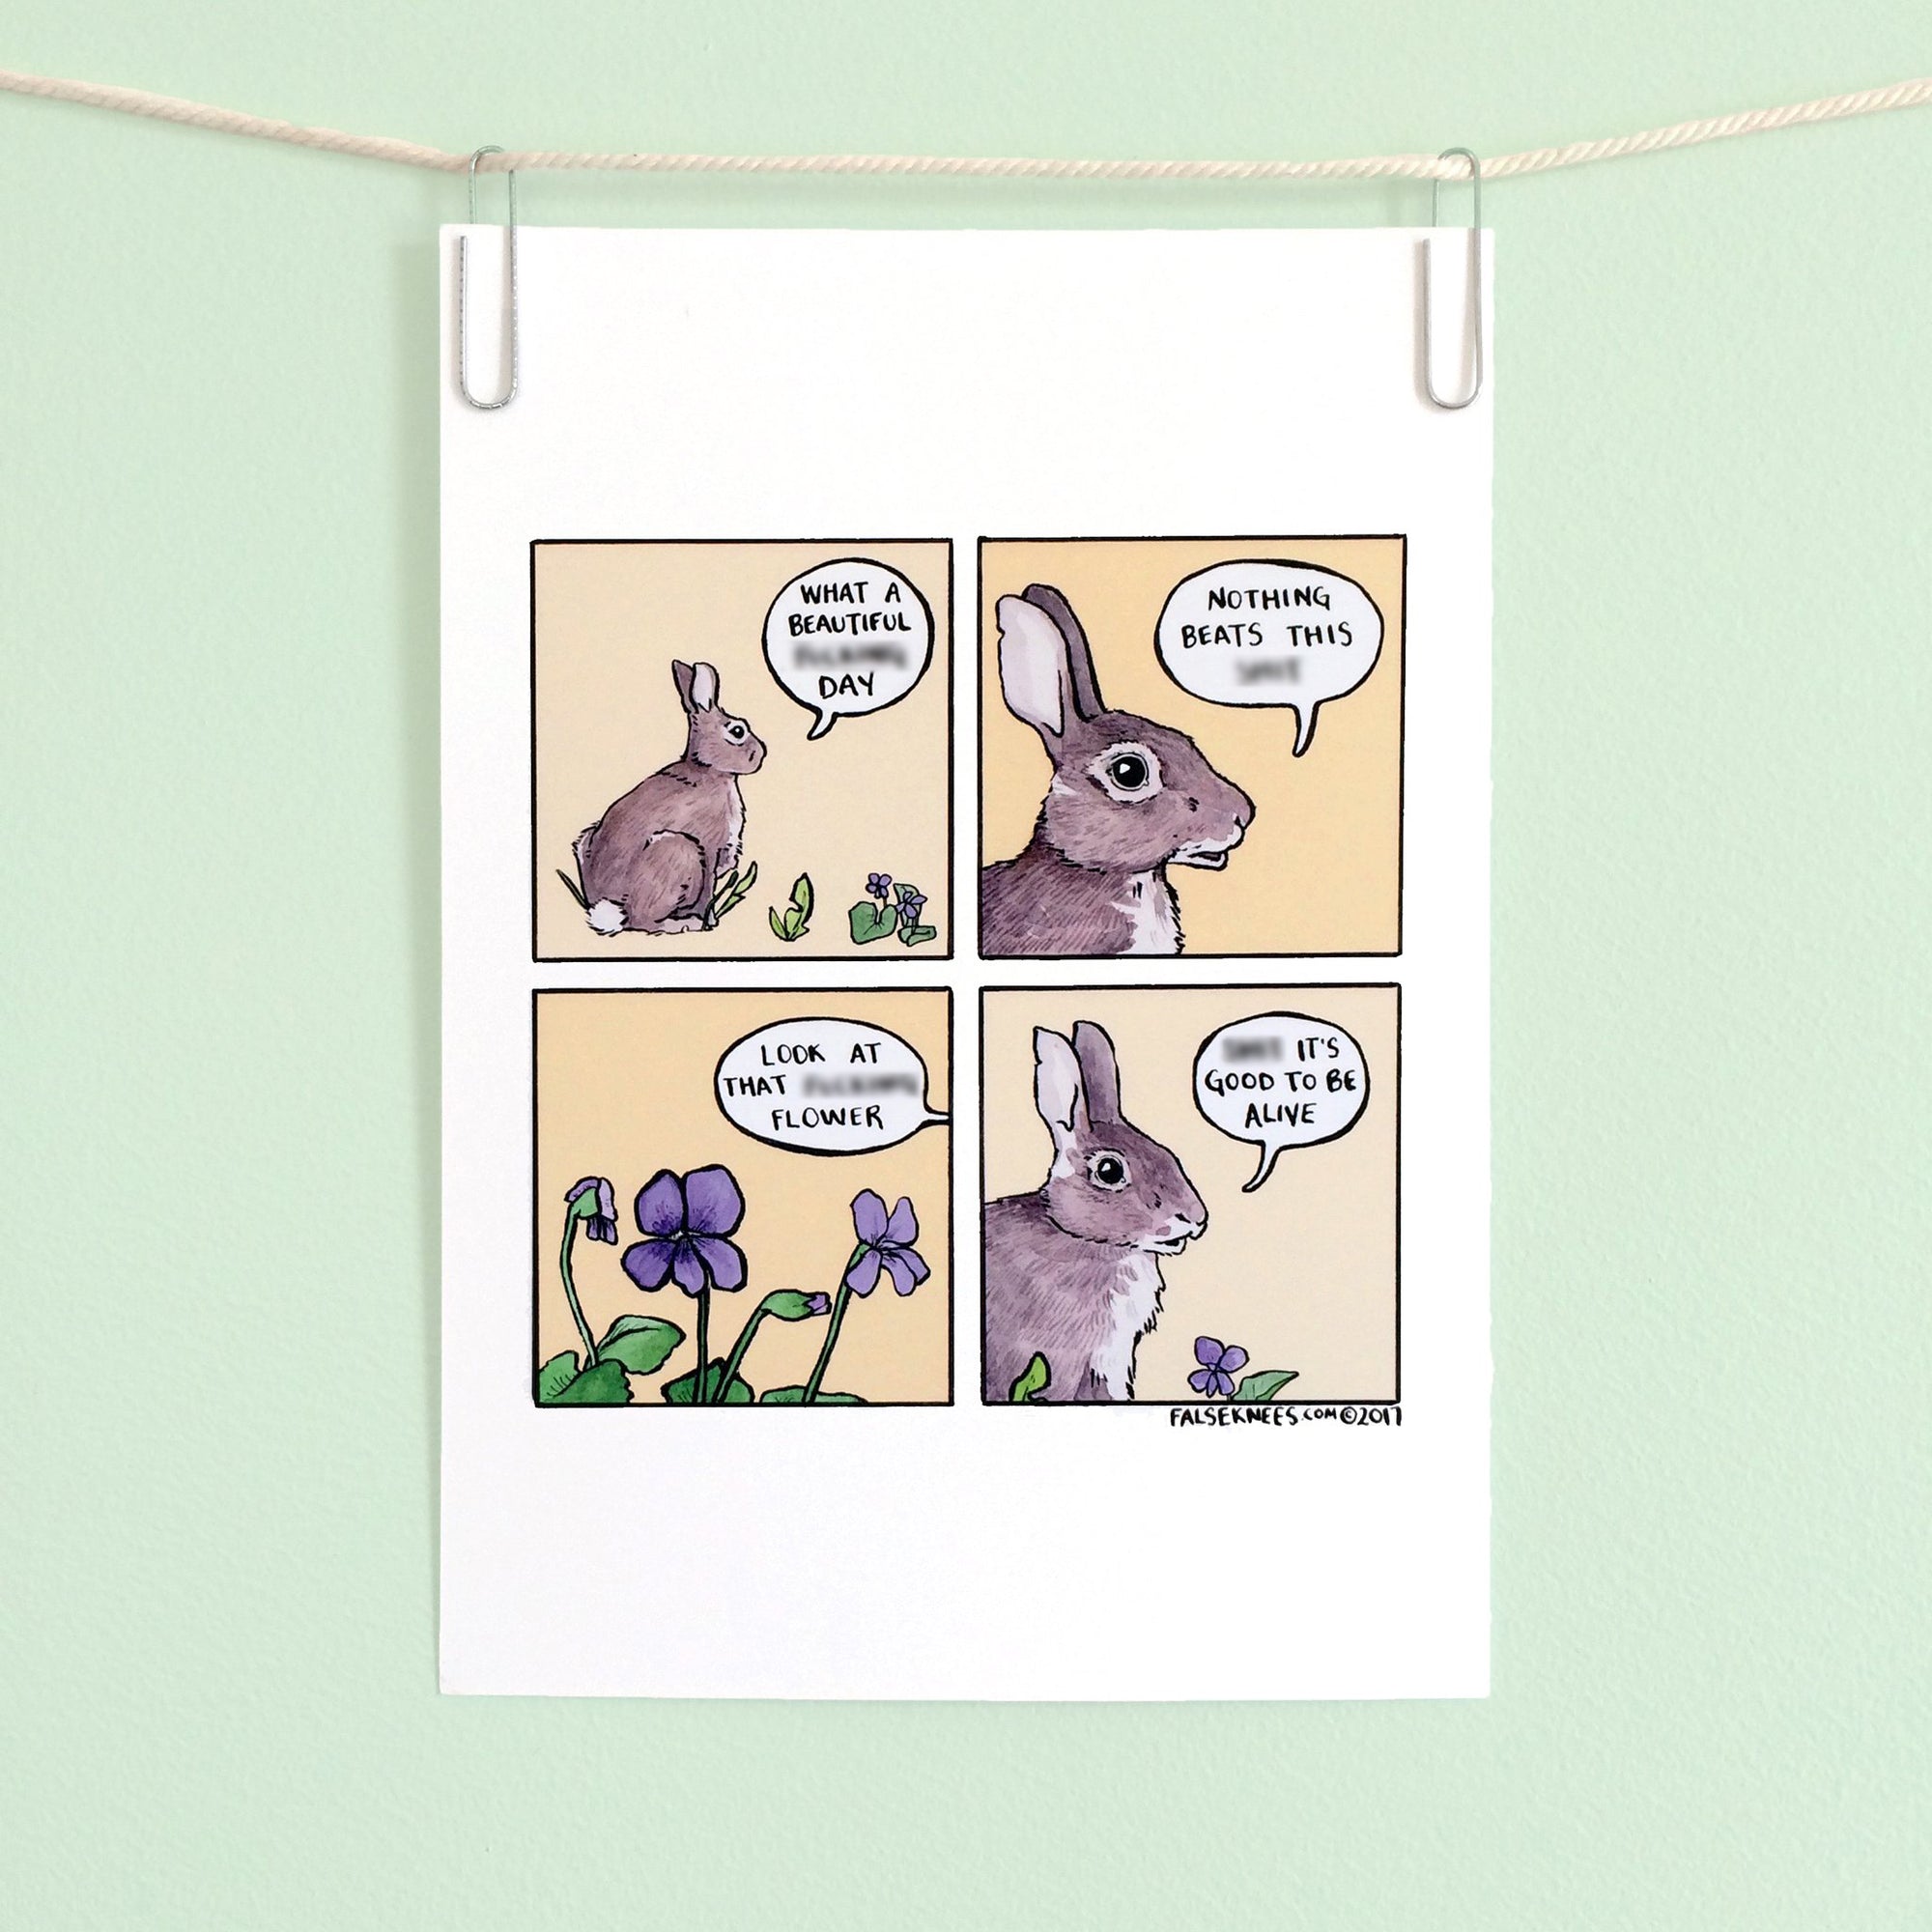 Sh*t It's Good To Be Alive Comic Print